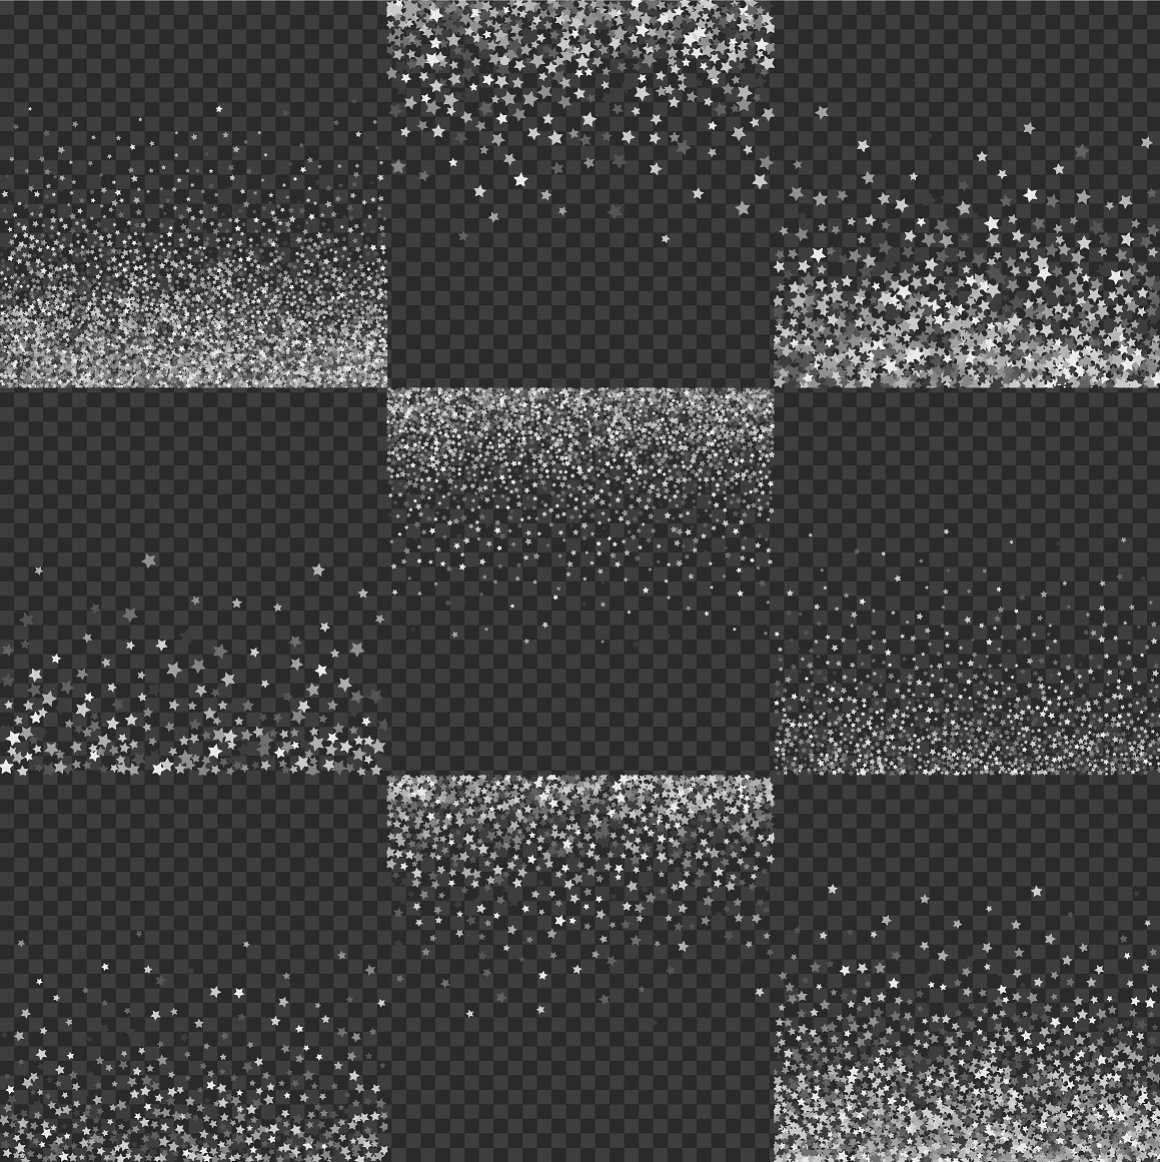 Cool small stars for different textures.